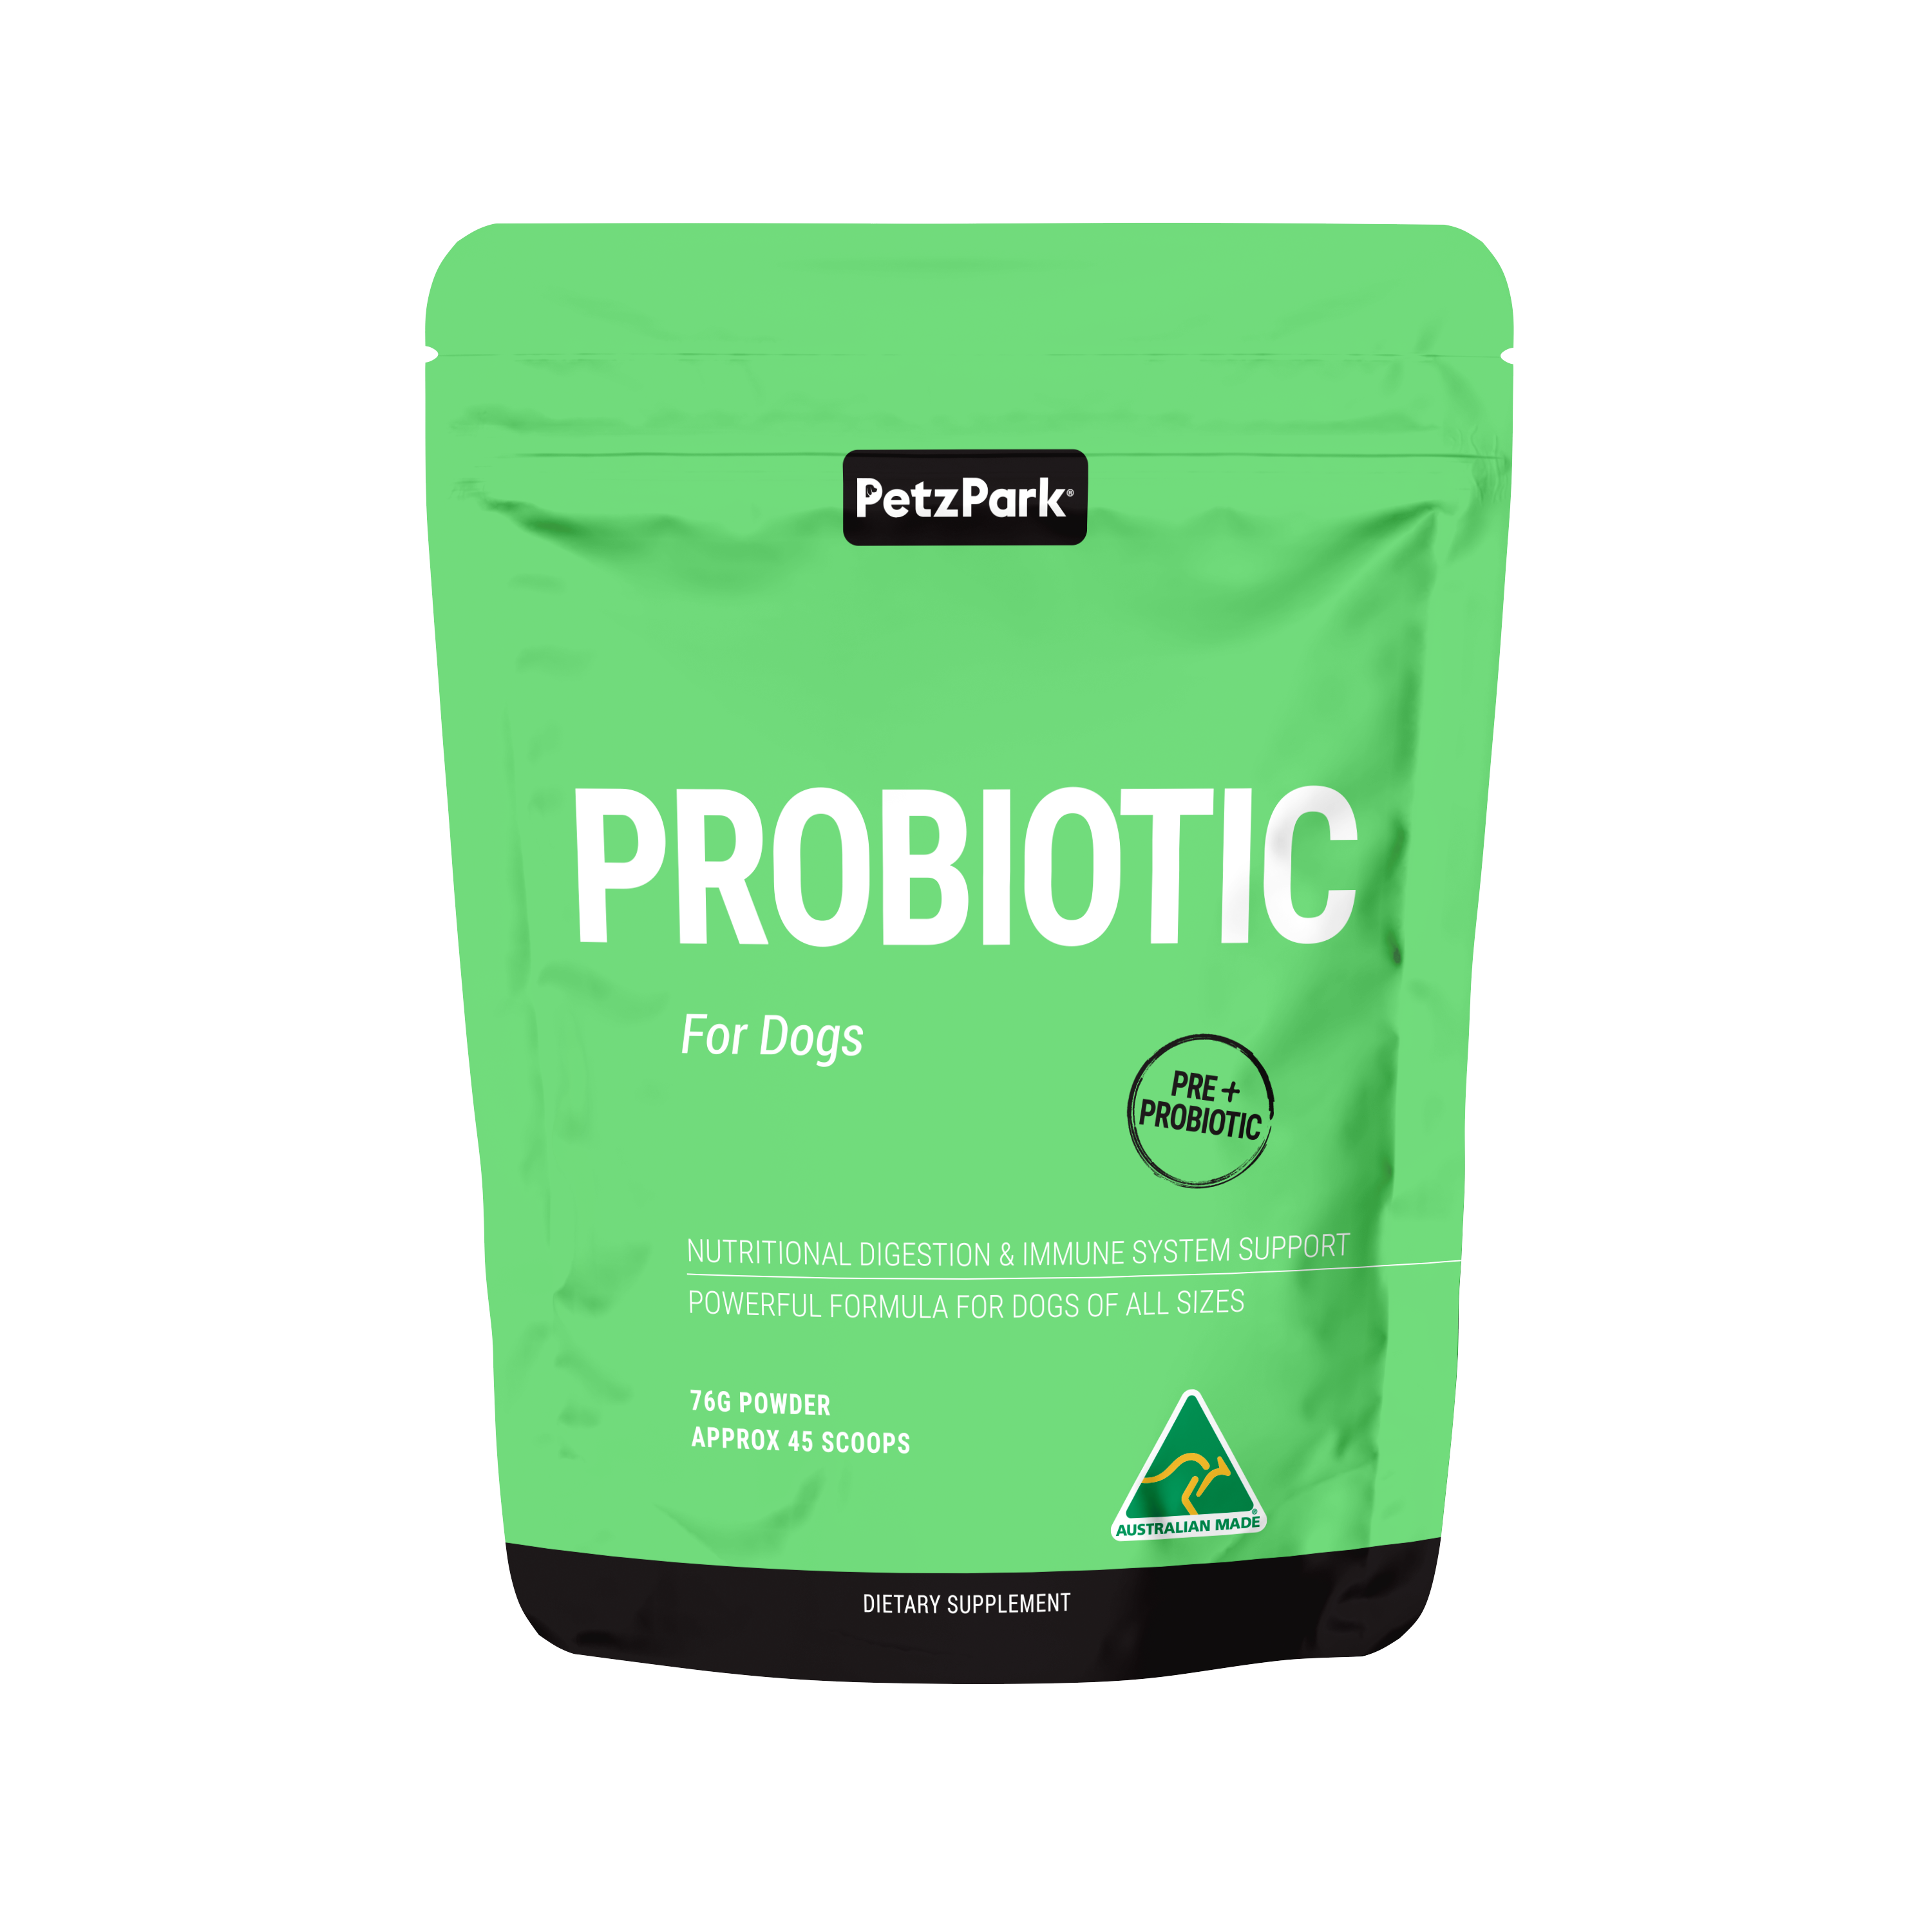 Petz Park Probiotics for Dogs is a powder supplement for gut health, allergies, immune health, and reducing paw-licking 